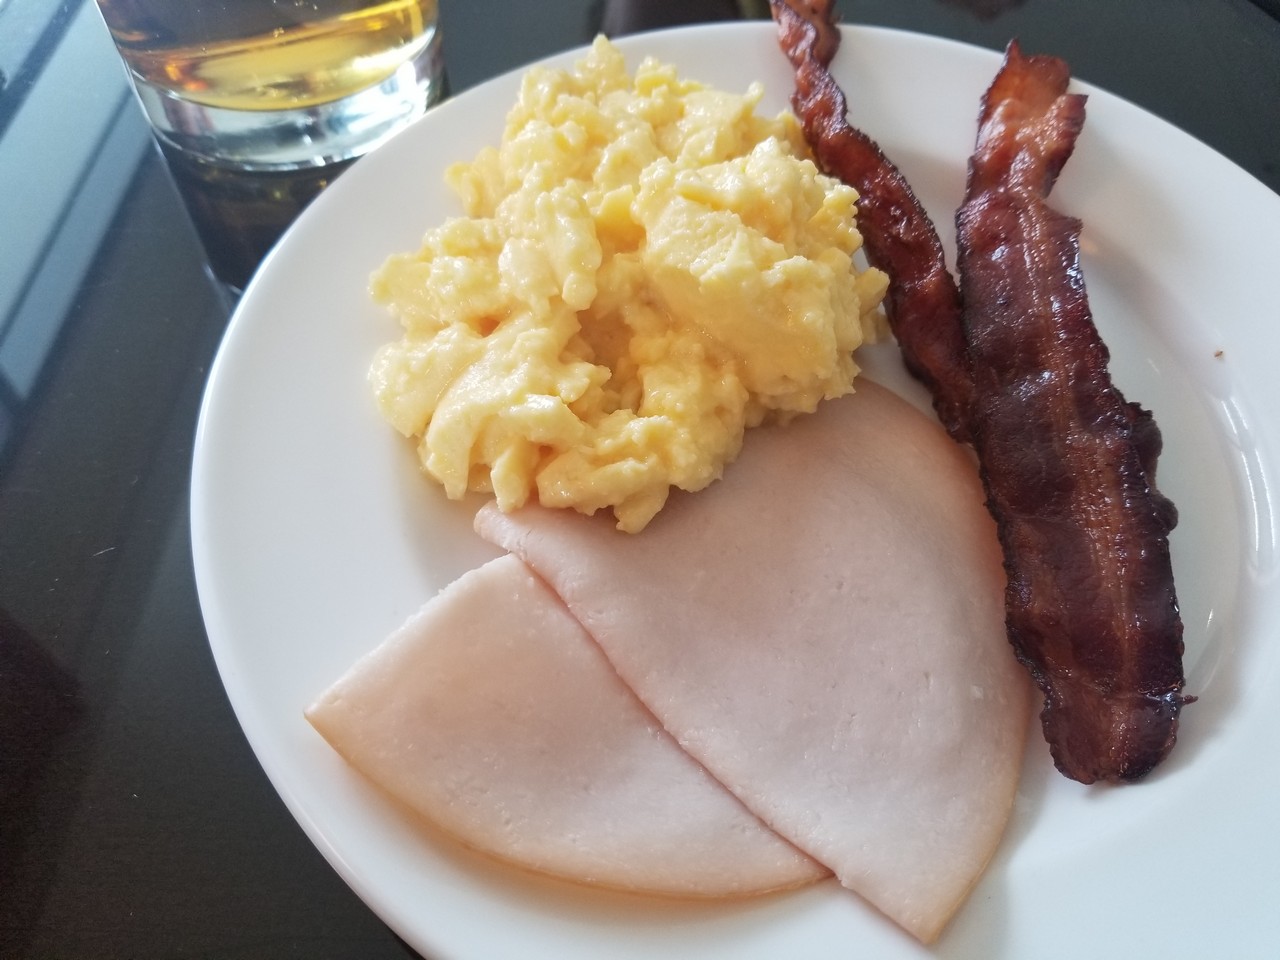 a plate of food with bacon and eggs